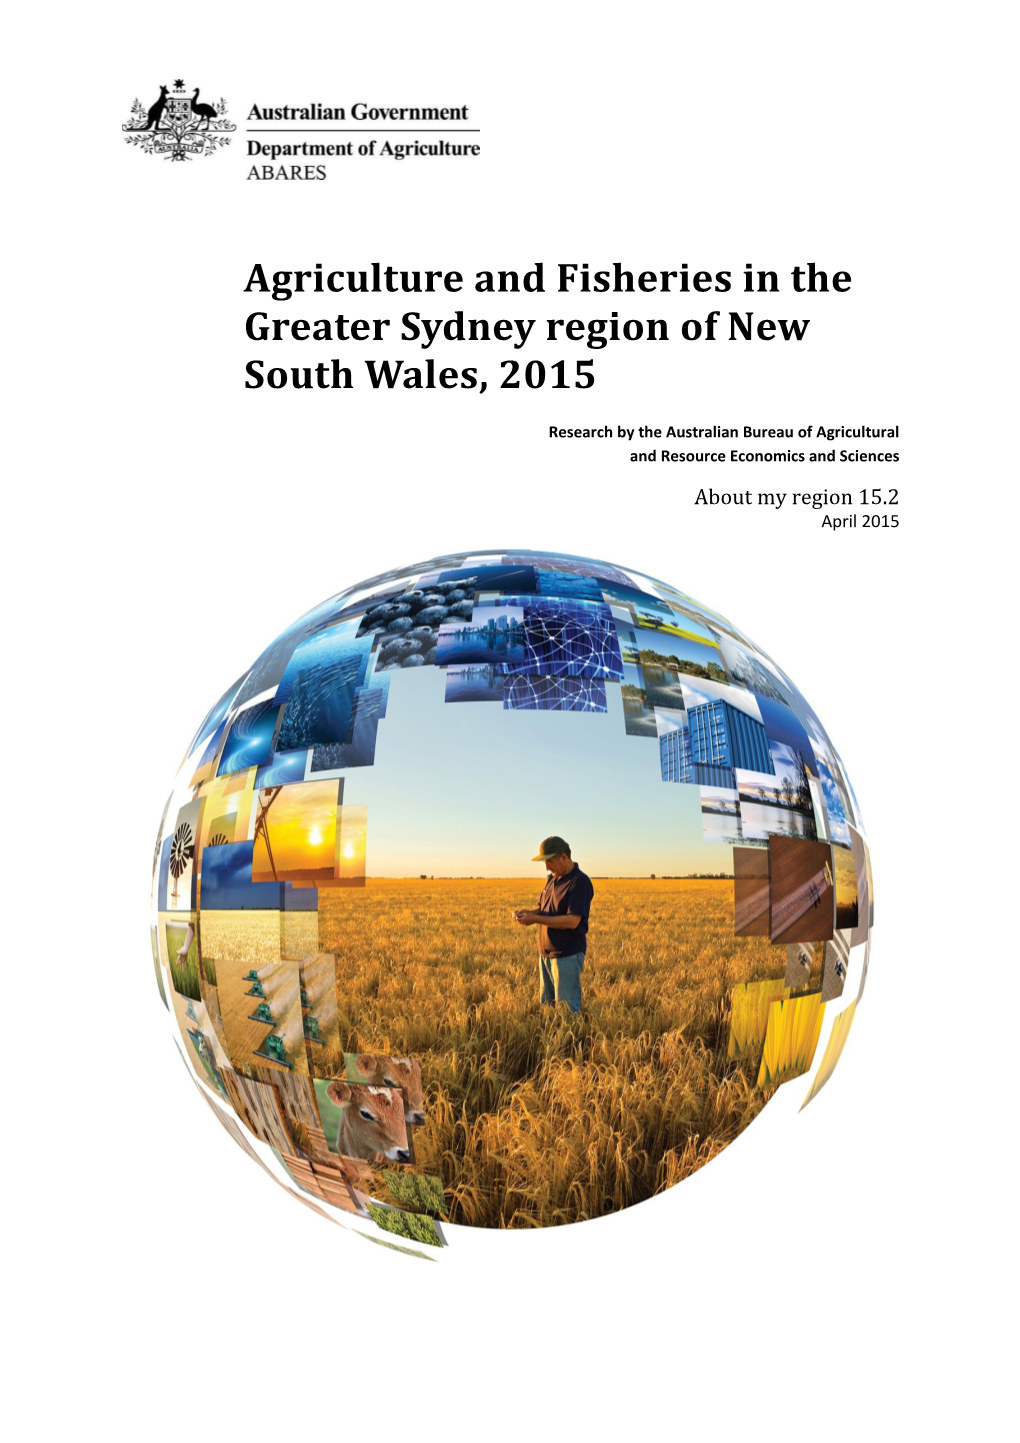 Agriculture and Fisheries in the Greater Sydney Region of New South Wales, 2015